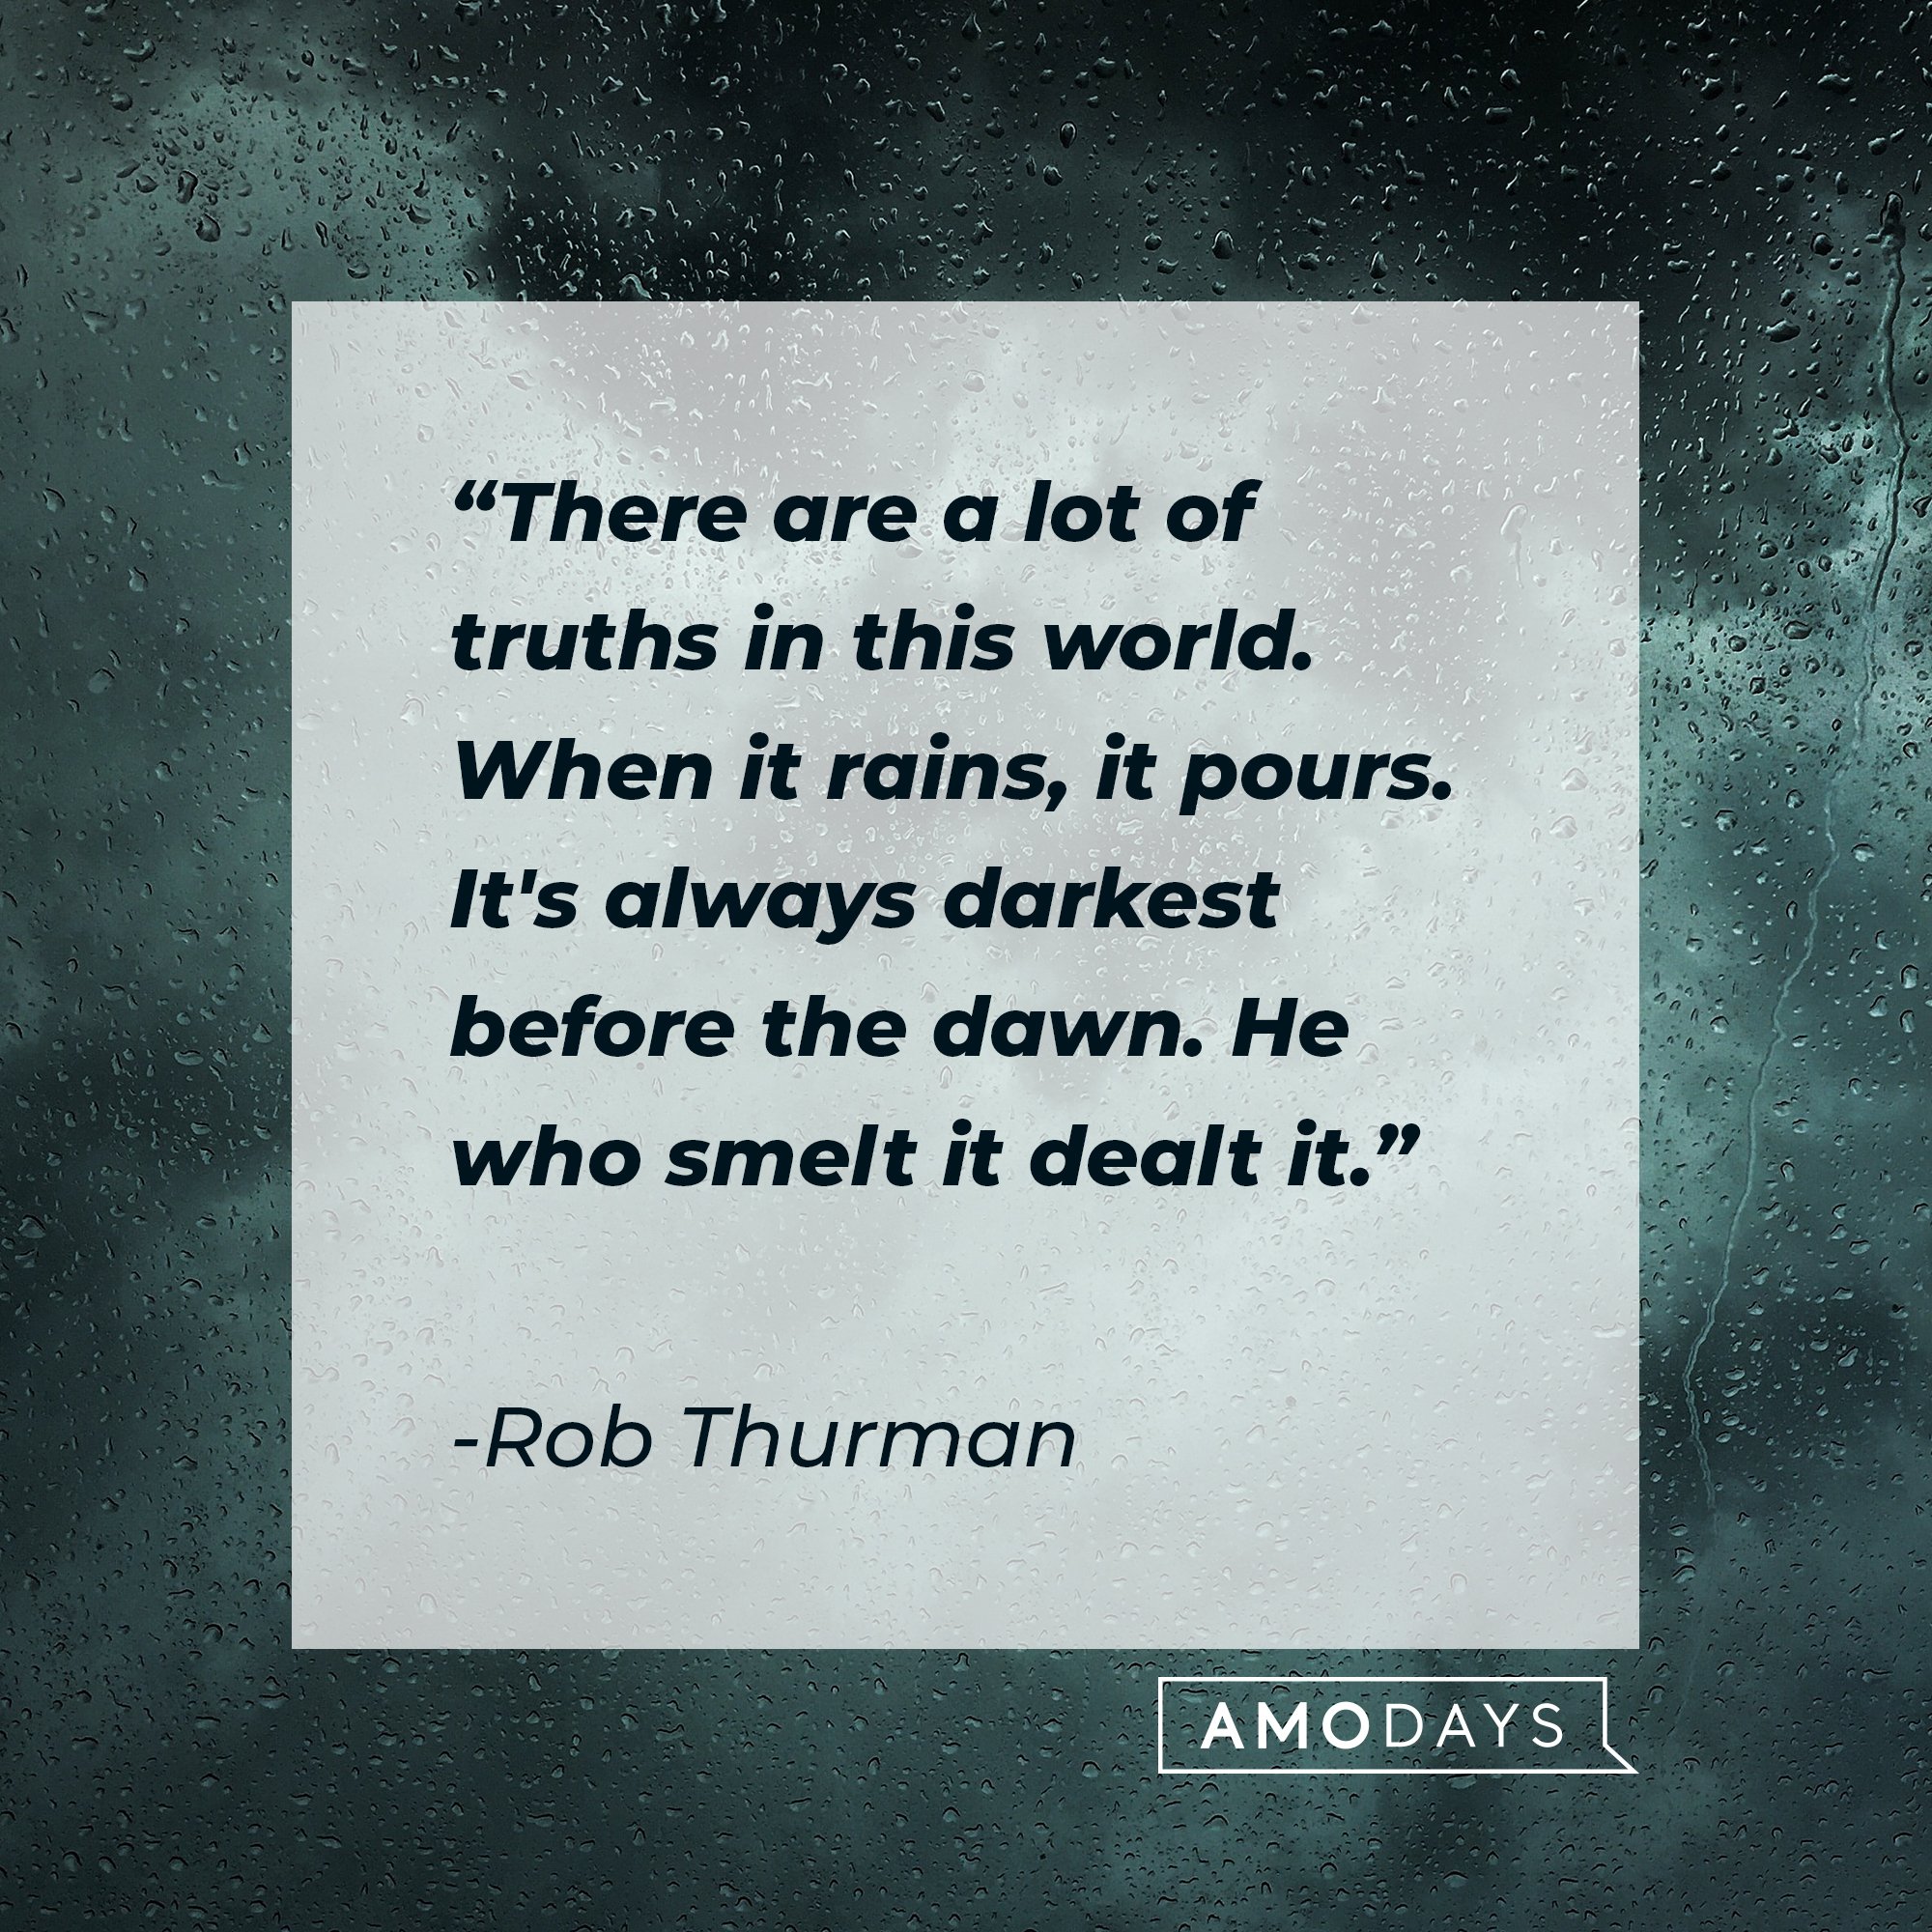 Rob Thurman’s quote: "There are a lot of truths in this world. When it rains, it pours. It's always darkest before the dawn. He who smelt it dealt it." | Image: AmoDays